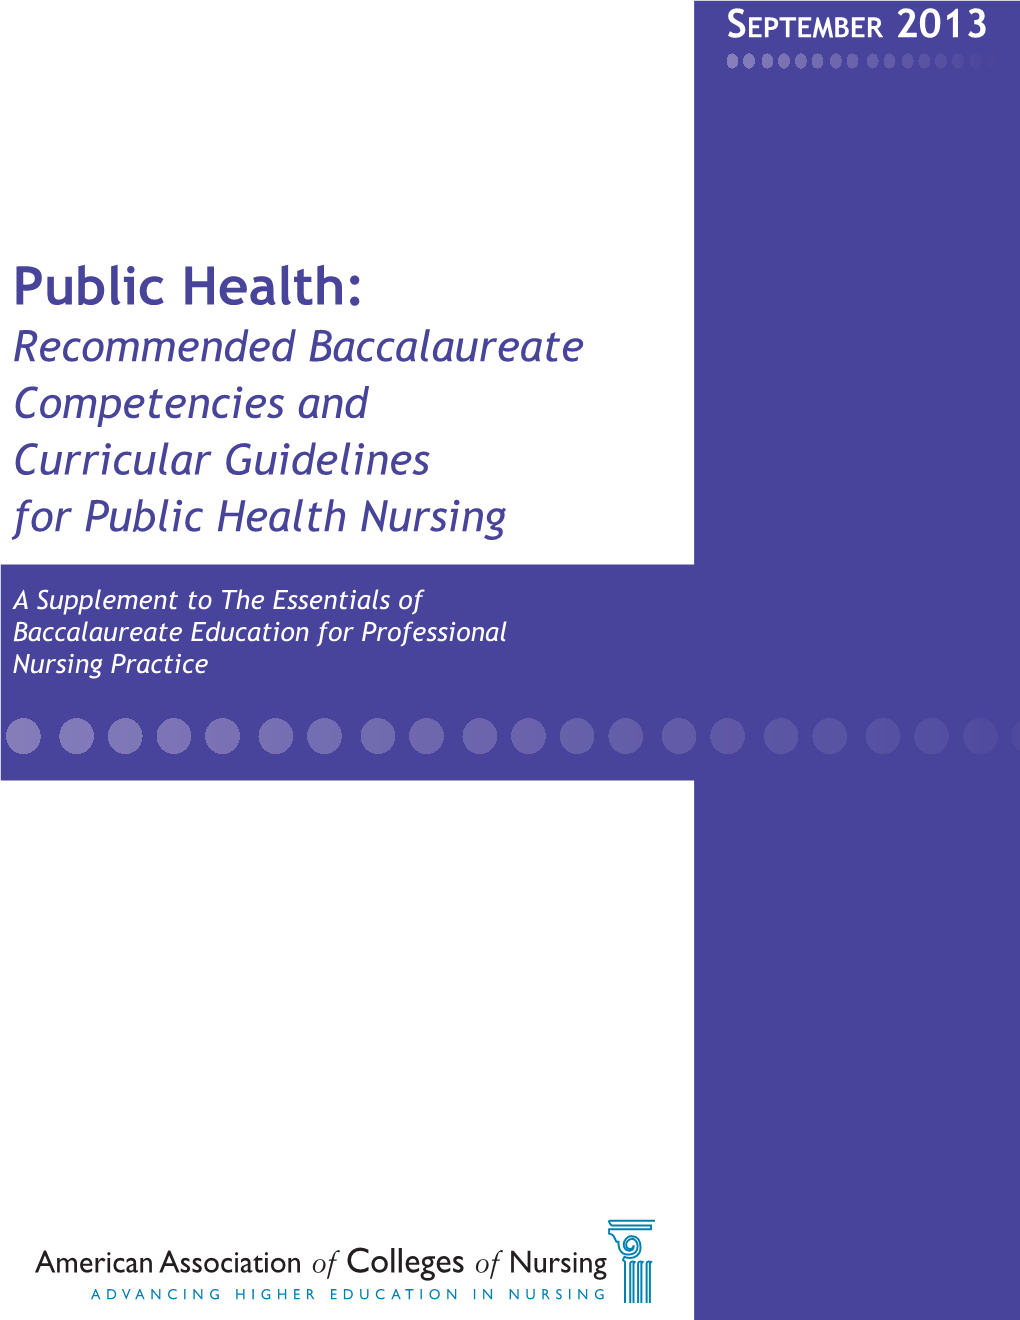 Public Health: Recommended Baccalaureate Competencies and Curricular Guidelines for Public Health Nursing